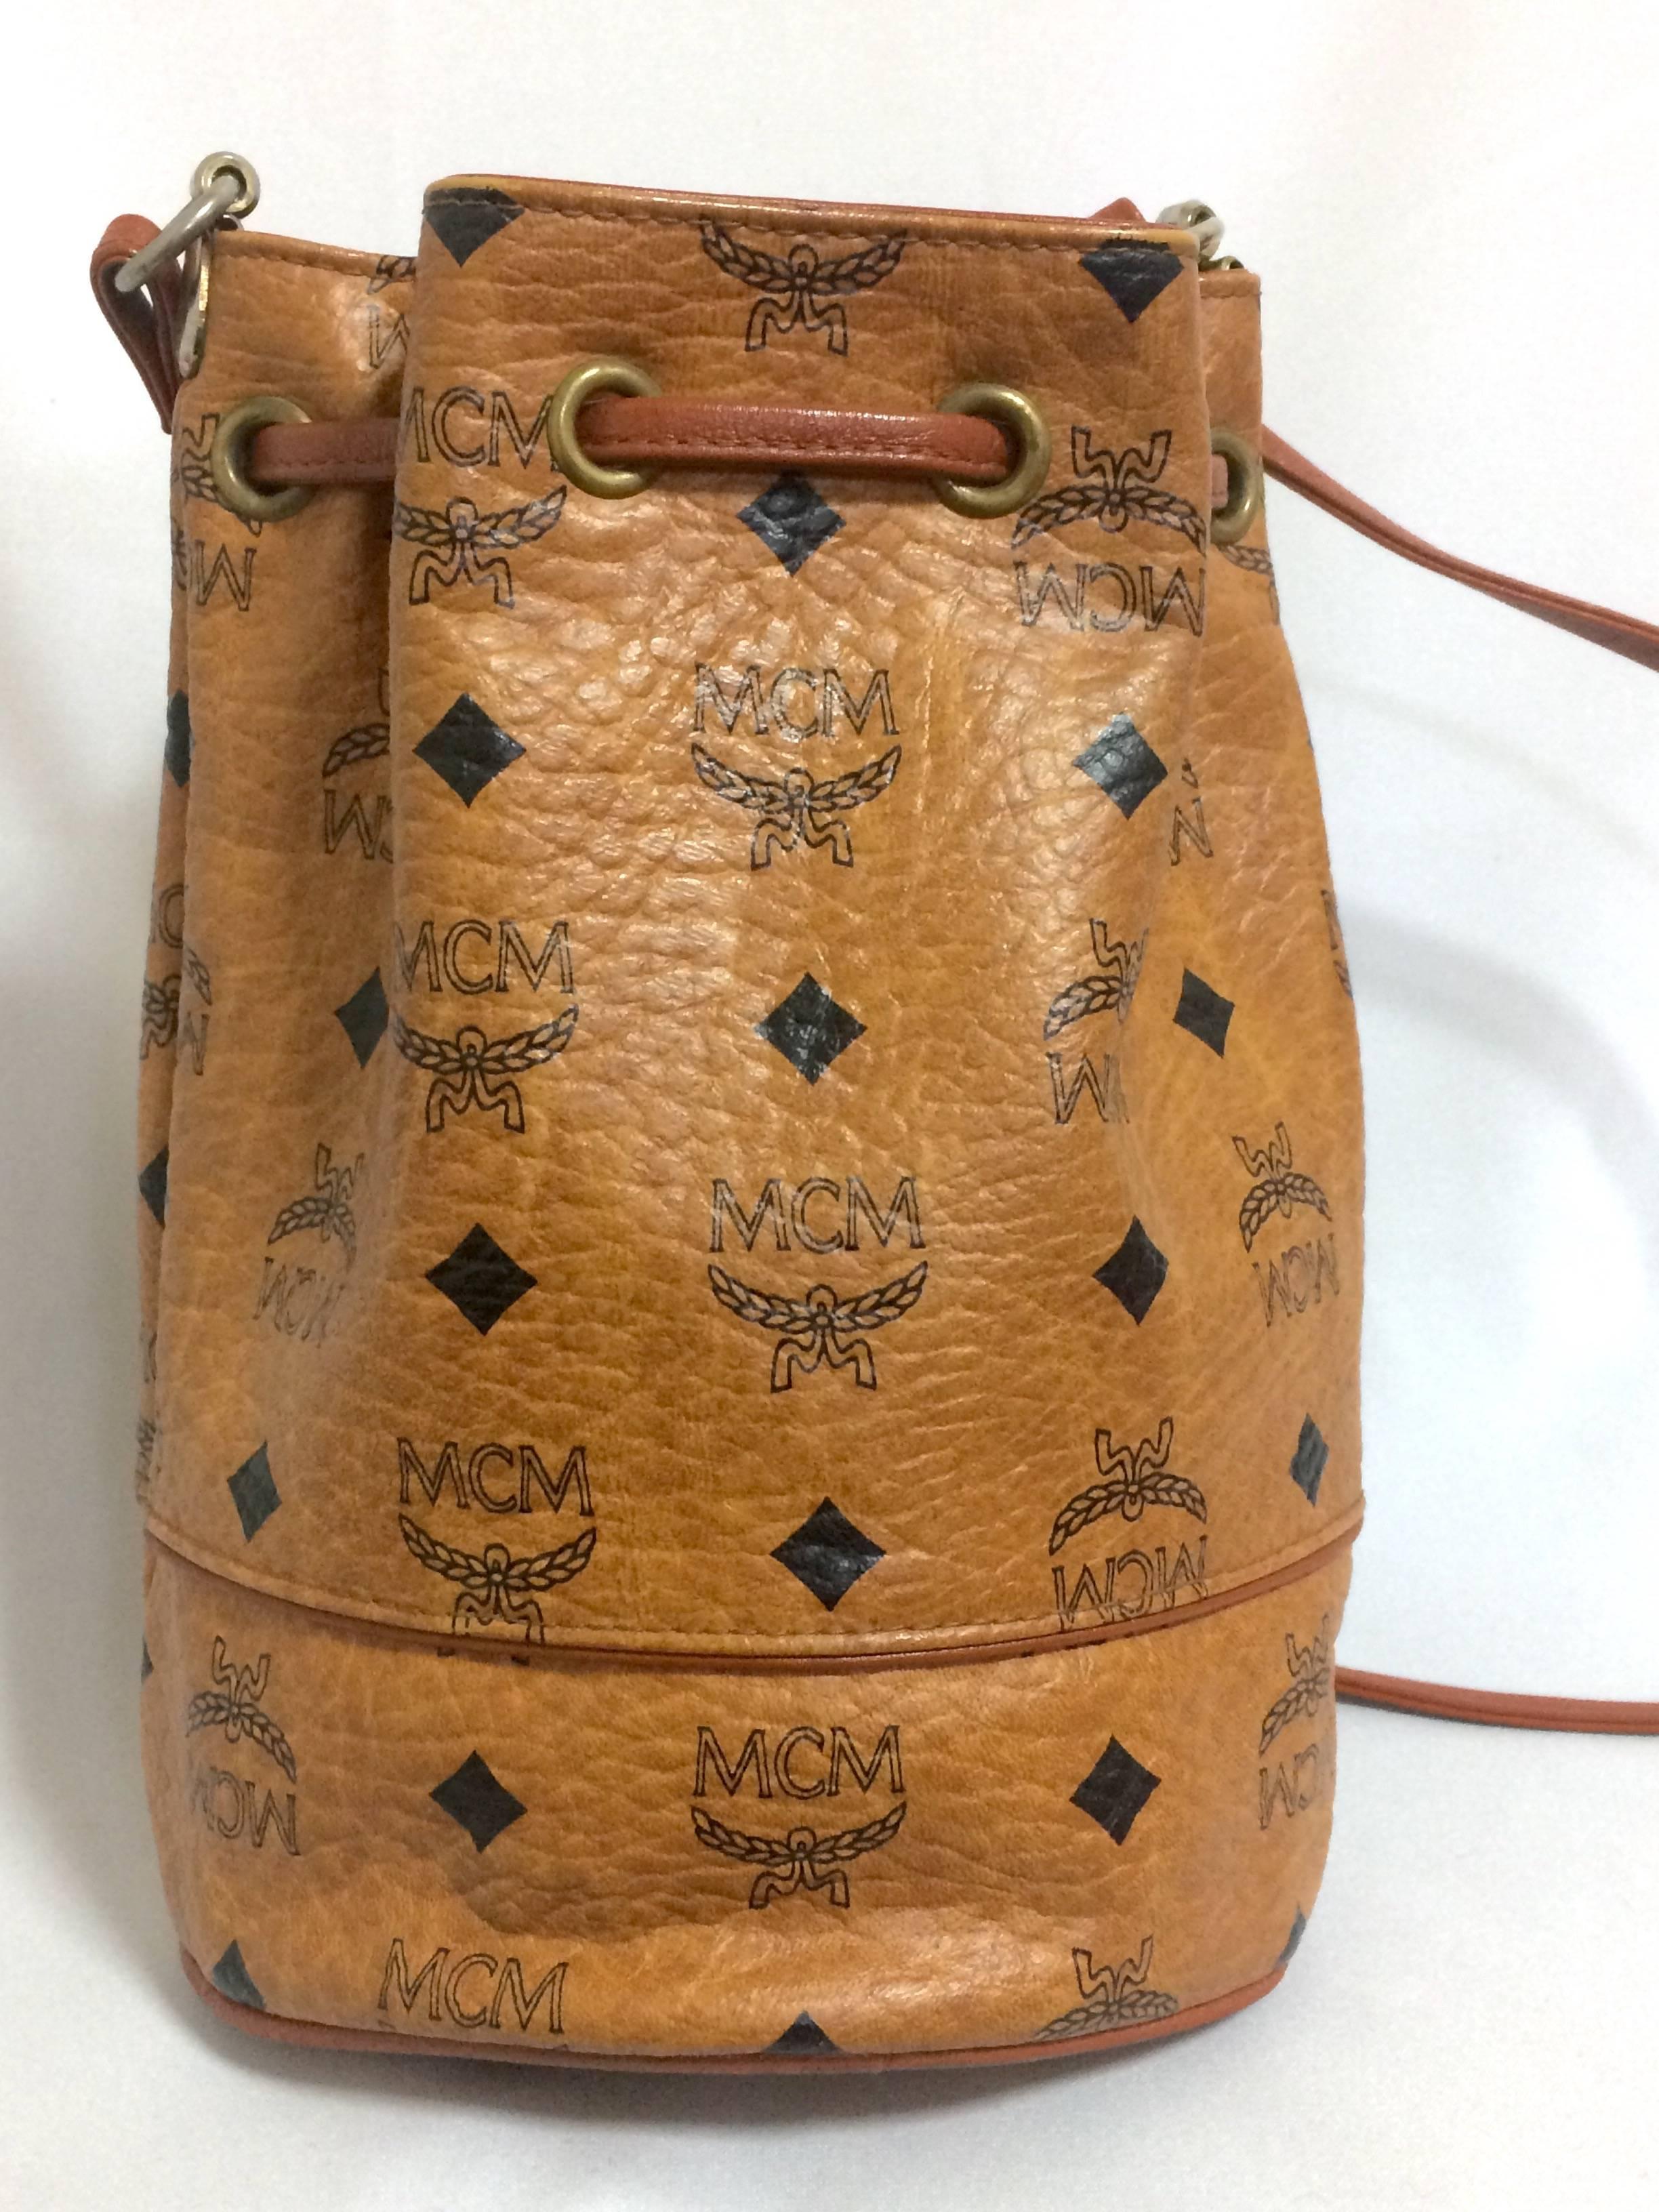 1980s. Vintage MCM brown monogram small hobo bucket bag. mini purse. Made in West Germany. Designed by Michael Cromer.

MCM has been back in the fashion trend again!!
Now it's considered to be one of the must-have designer in fashion.

Introducing a